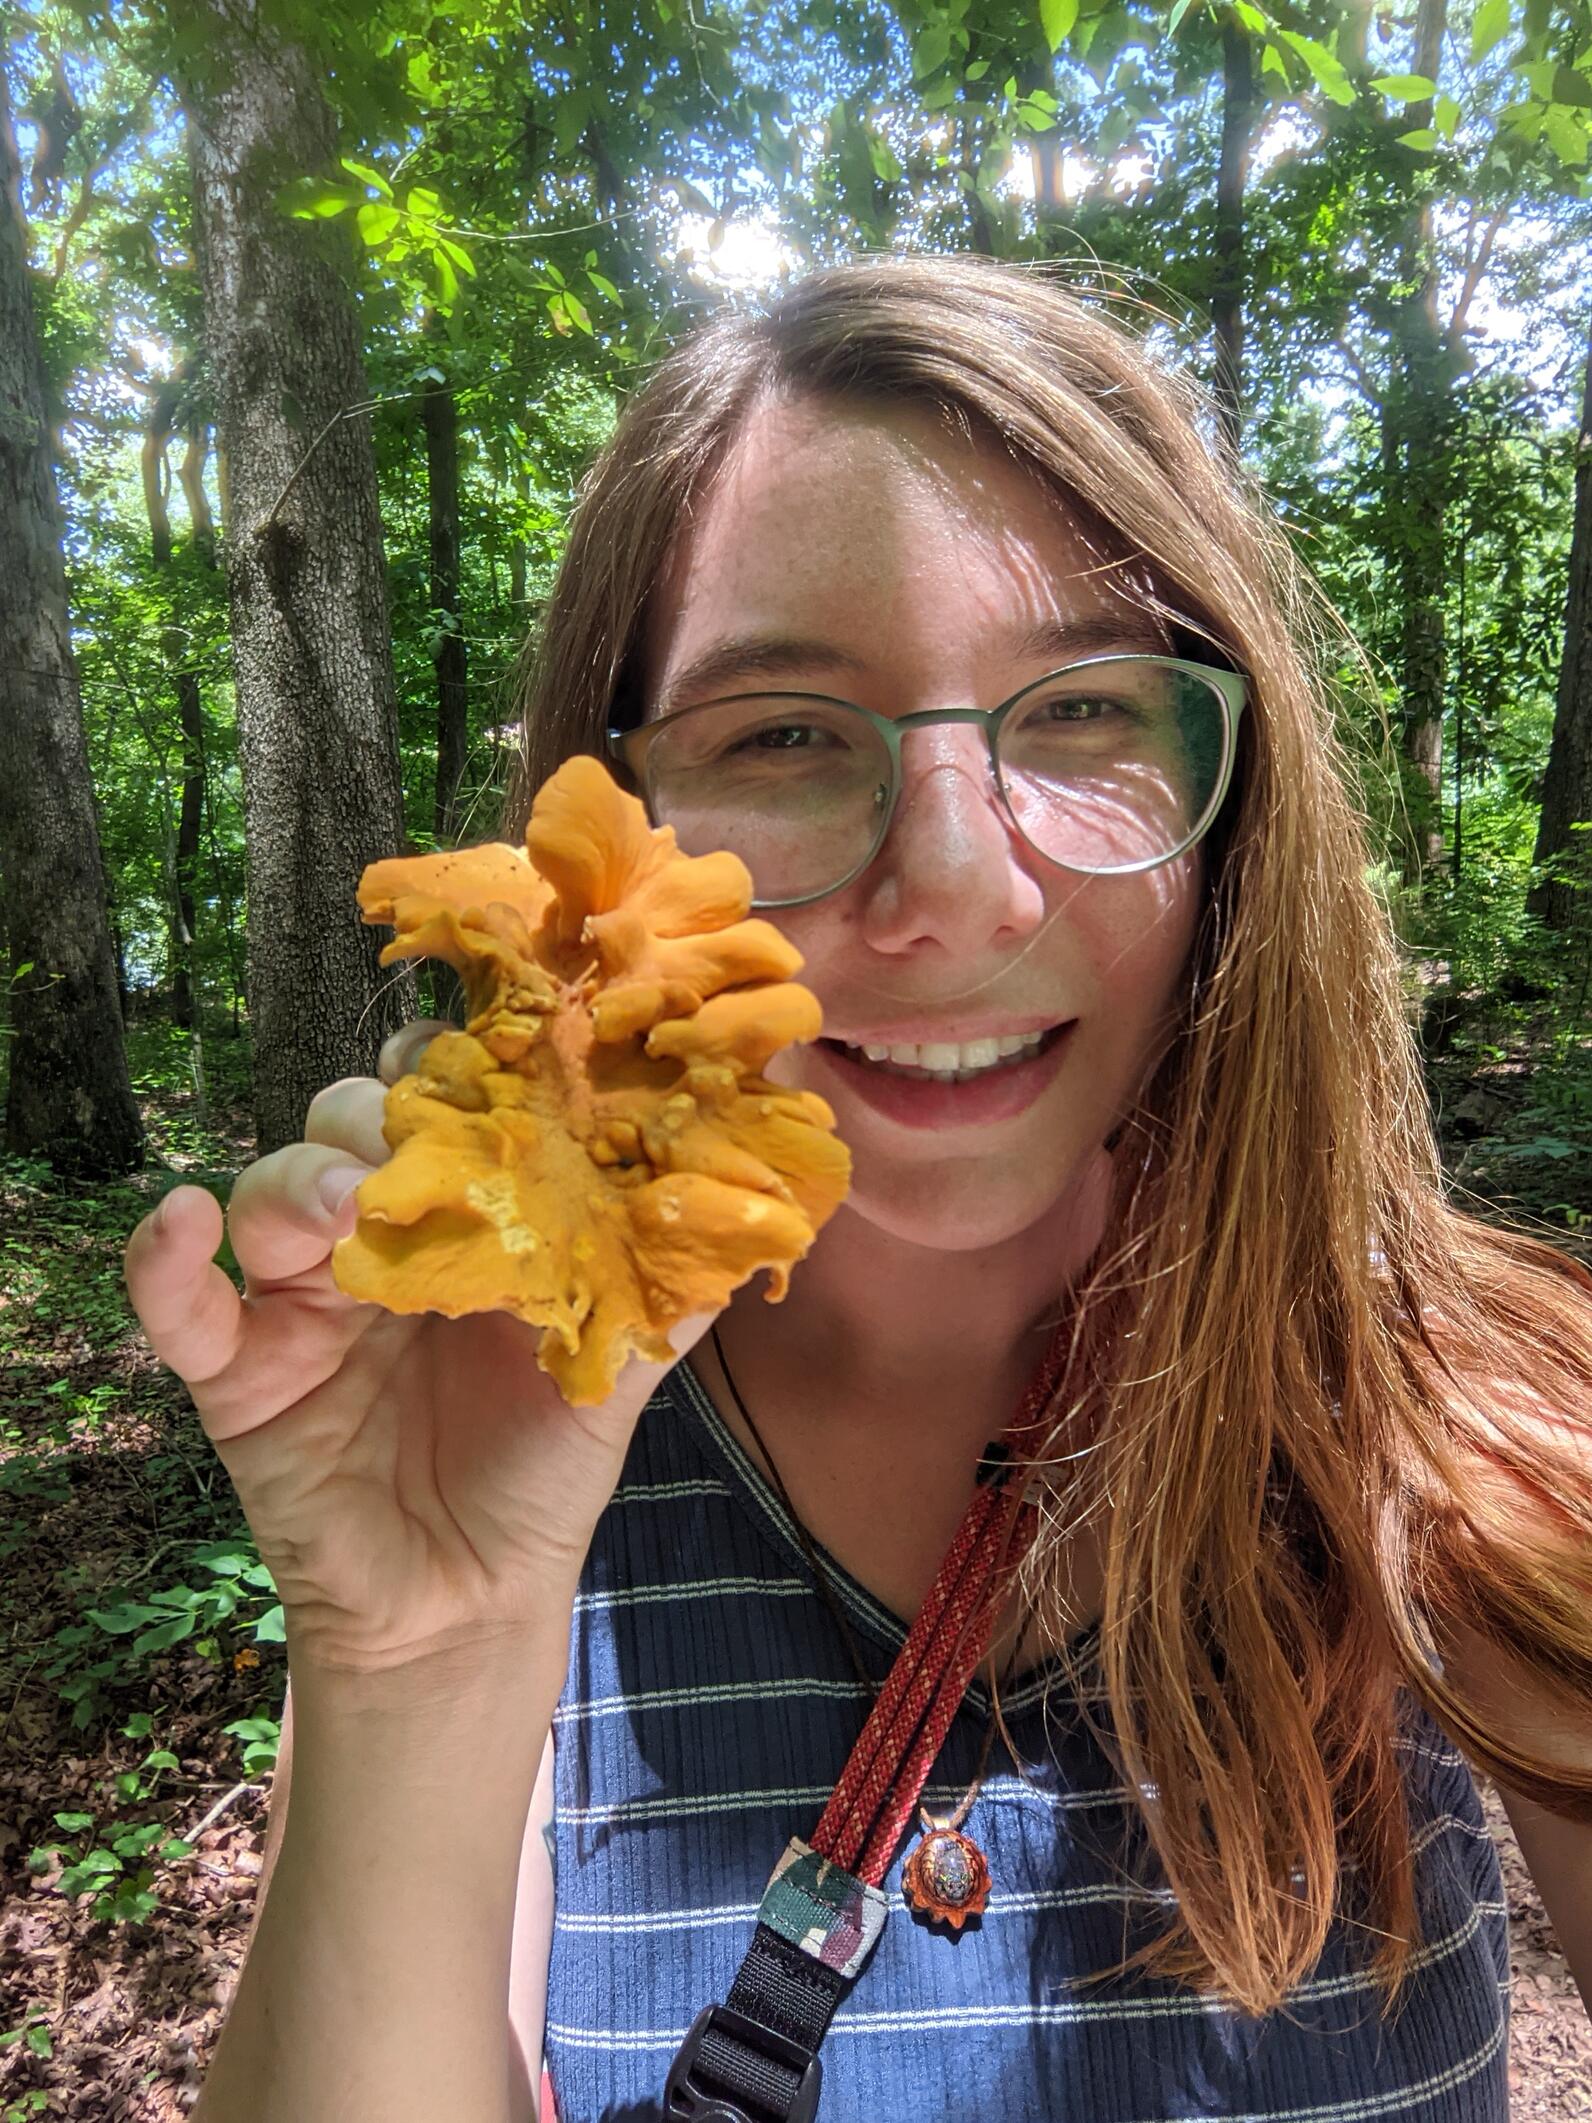 Samantha holds a golden orange colored mushroom close to the camera while standing in the woods on a sunny day wearing a blue stripped tank top.